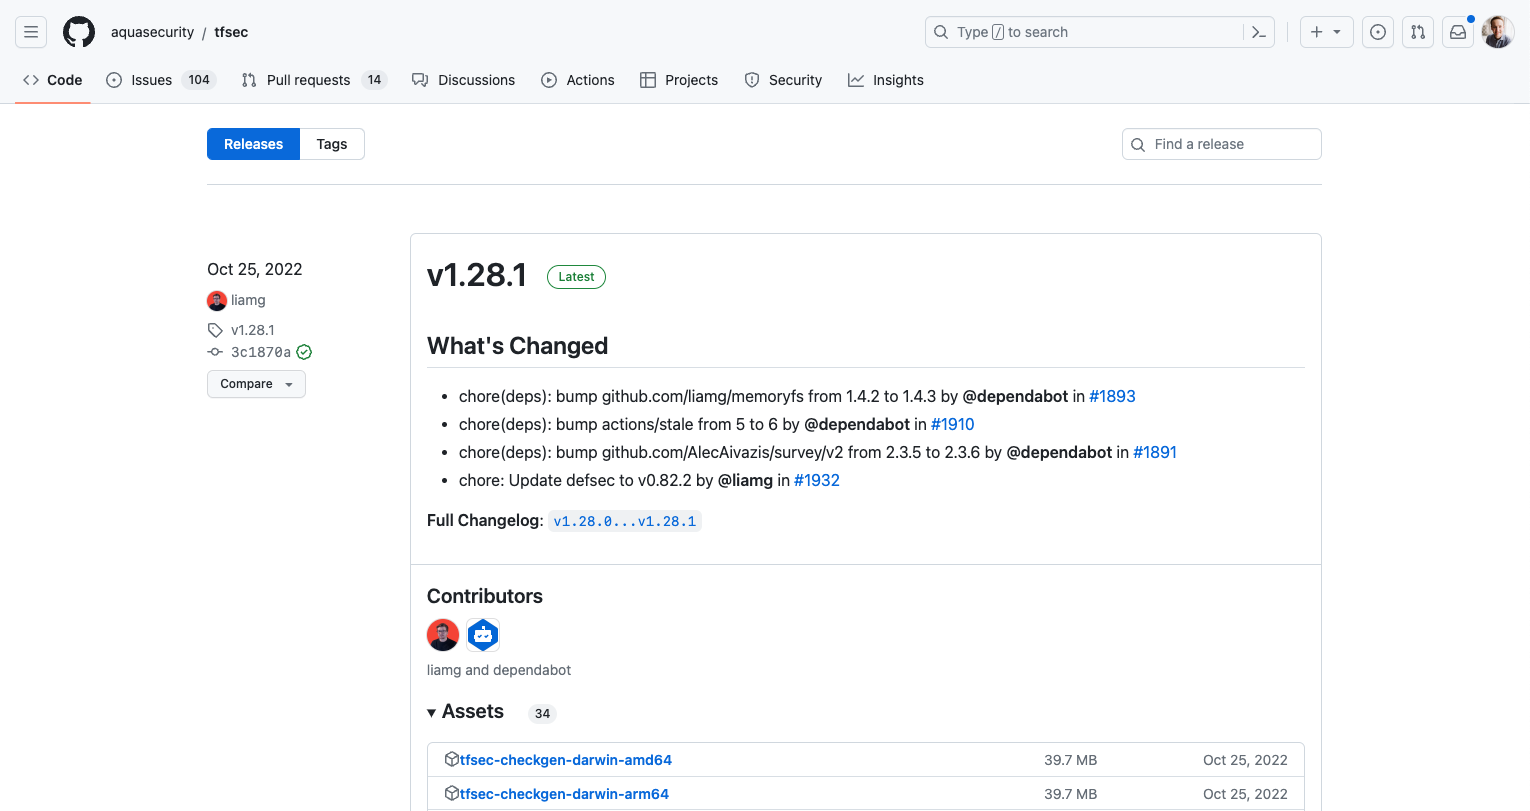 The Latest Release in a GitHub Repo